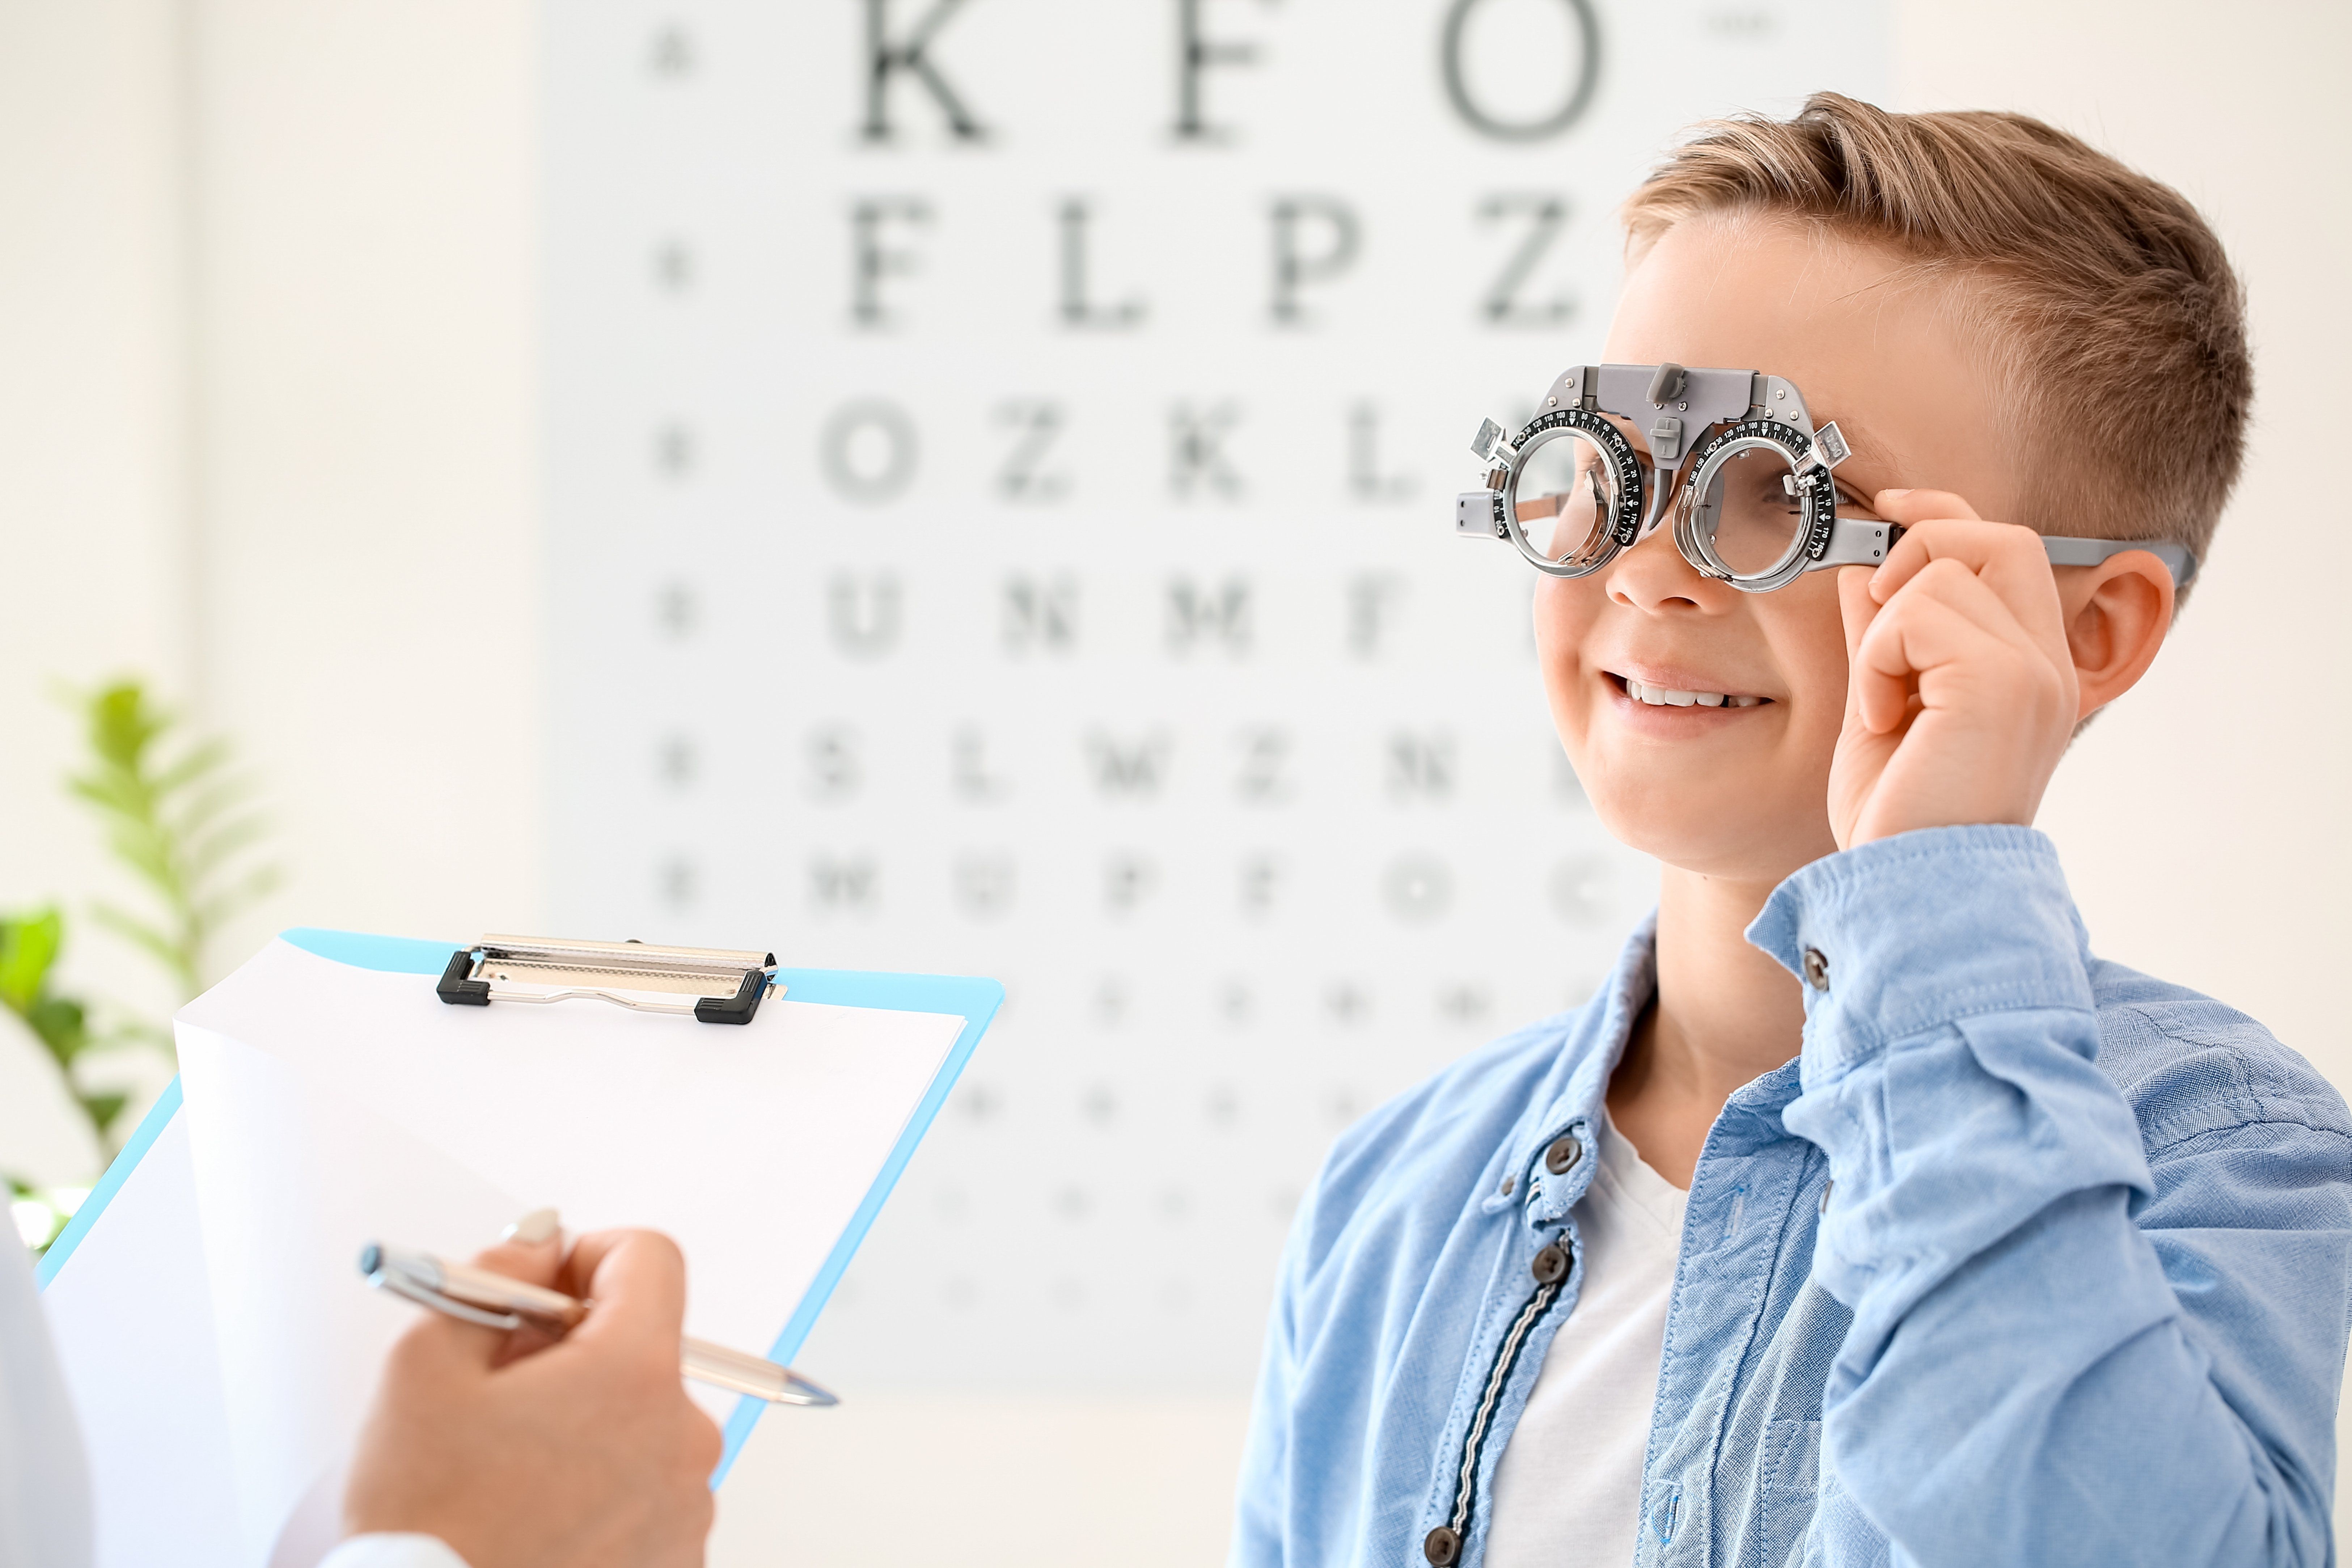 What Type of Lens Are Used to Correct Myopia?